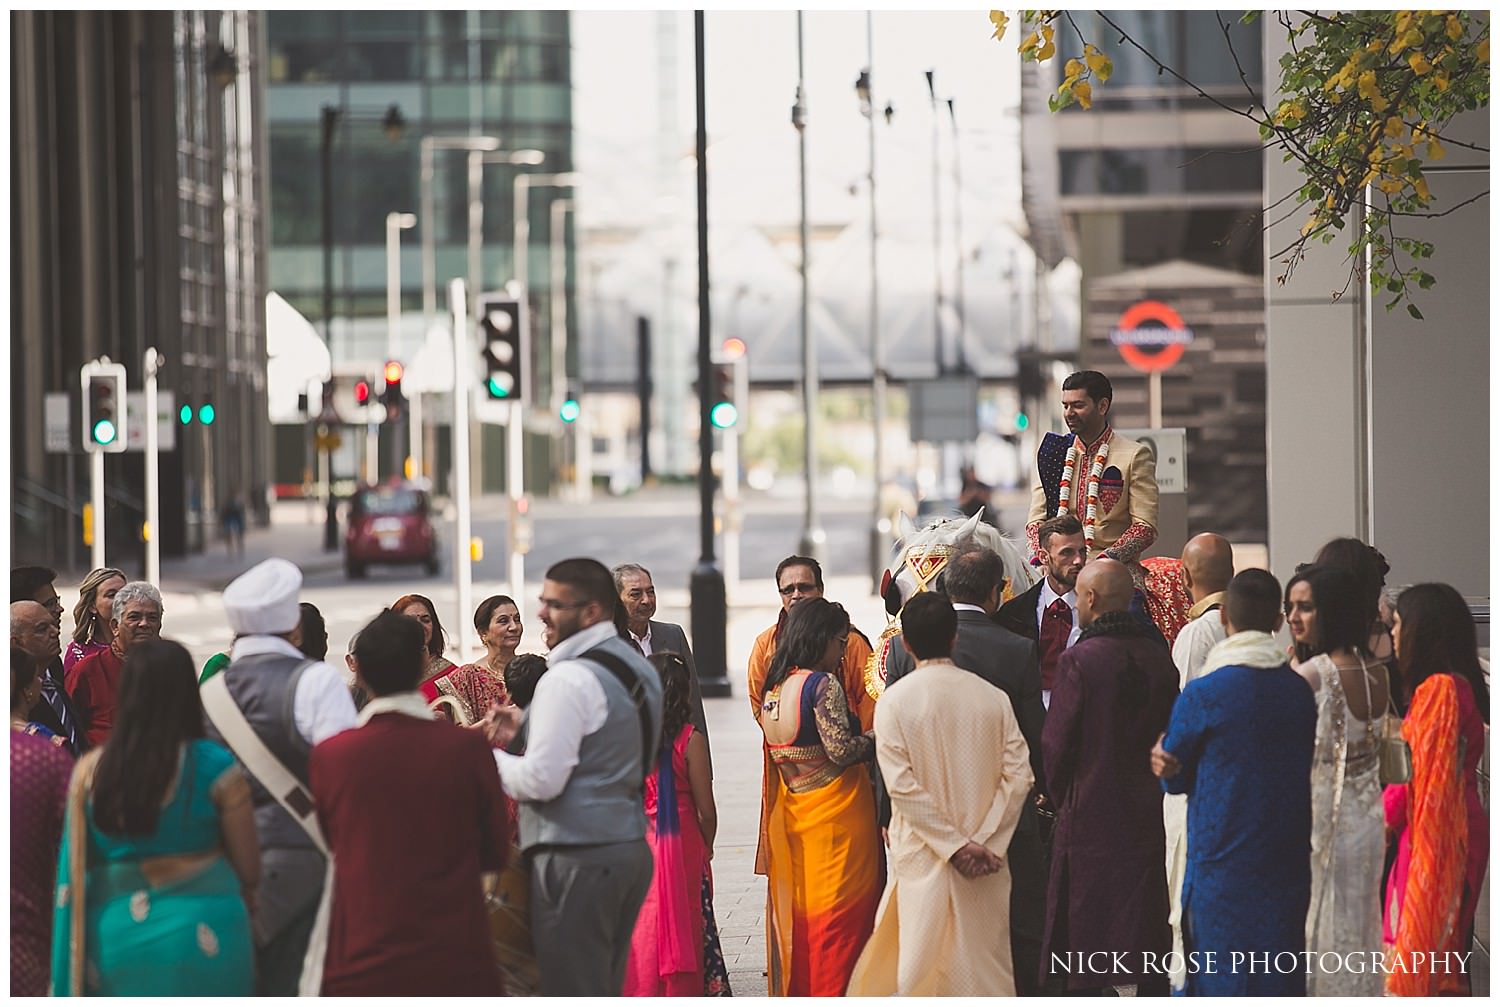  Hindu wedding Baraat with horse entrance at the East Wintergarden in London's Canary Wharf 